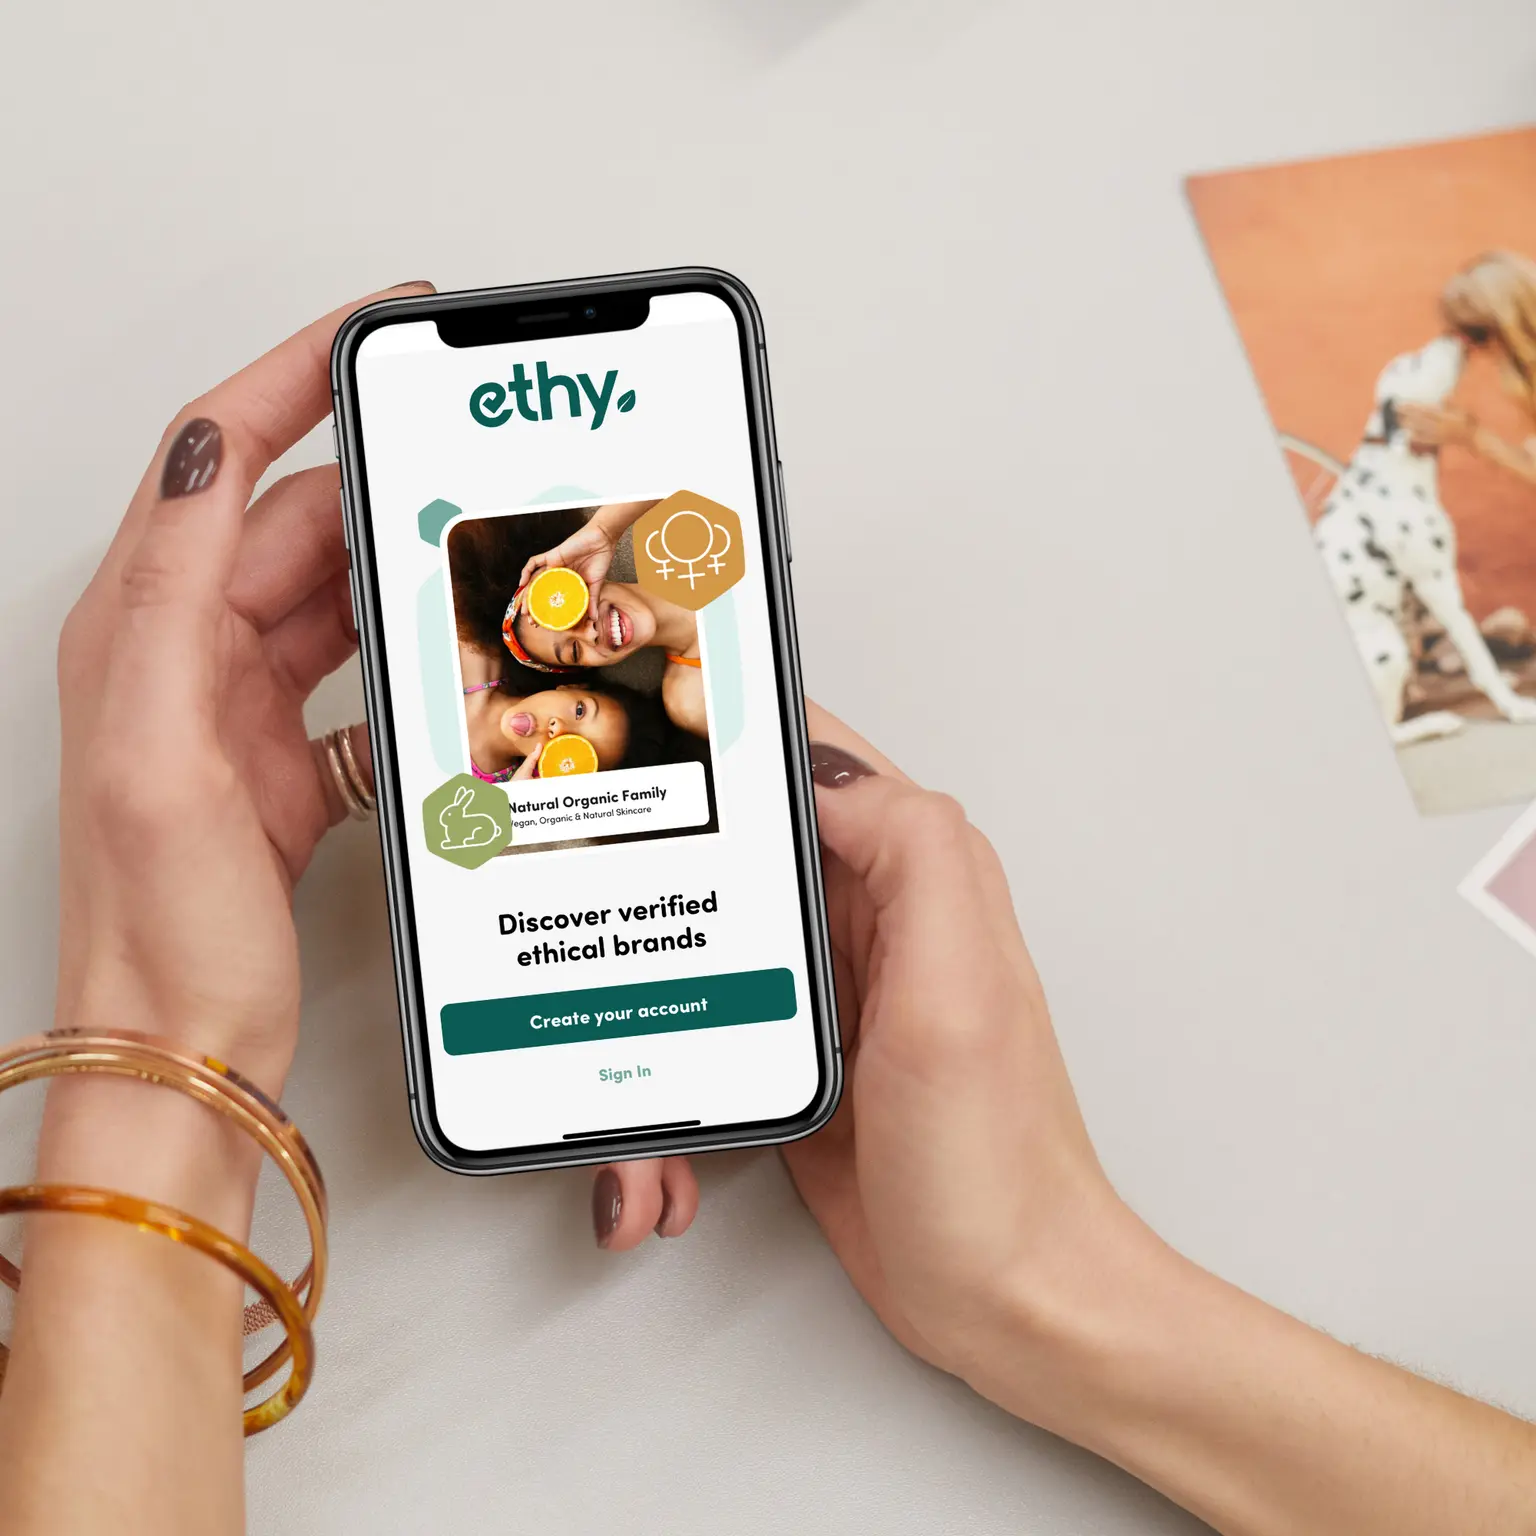 As sustainability becomes the key purchase driver across consumer goods sectors, ethy's trust marks are giving customers faith in the brands that are truly green and sustainable – with booming sales results.